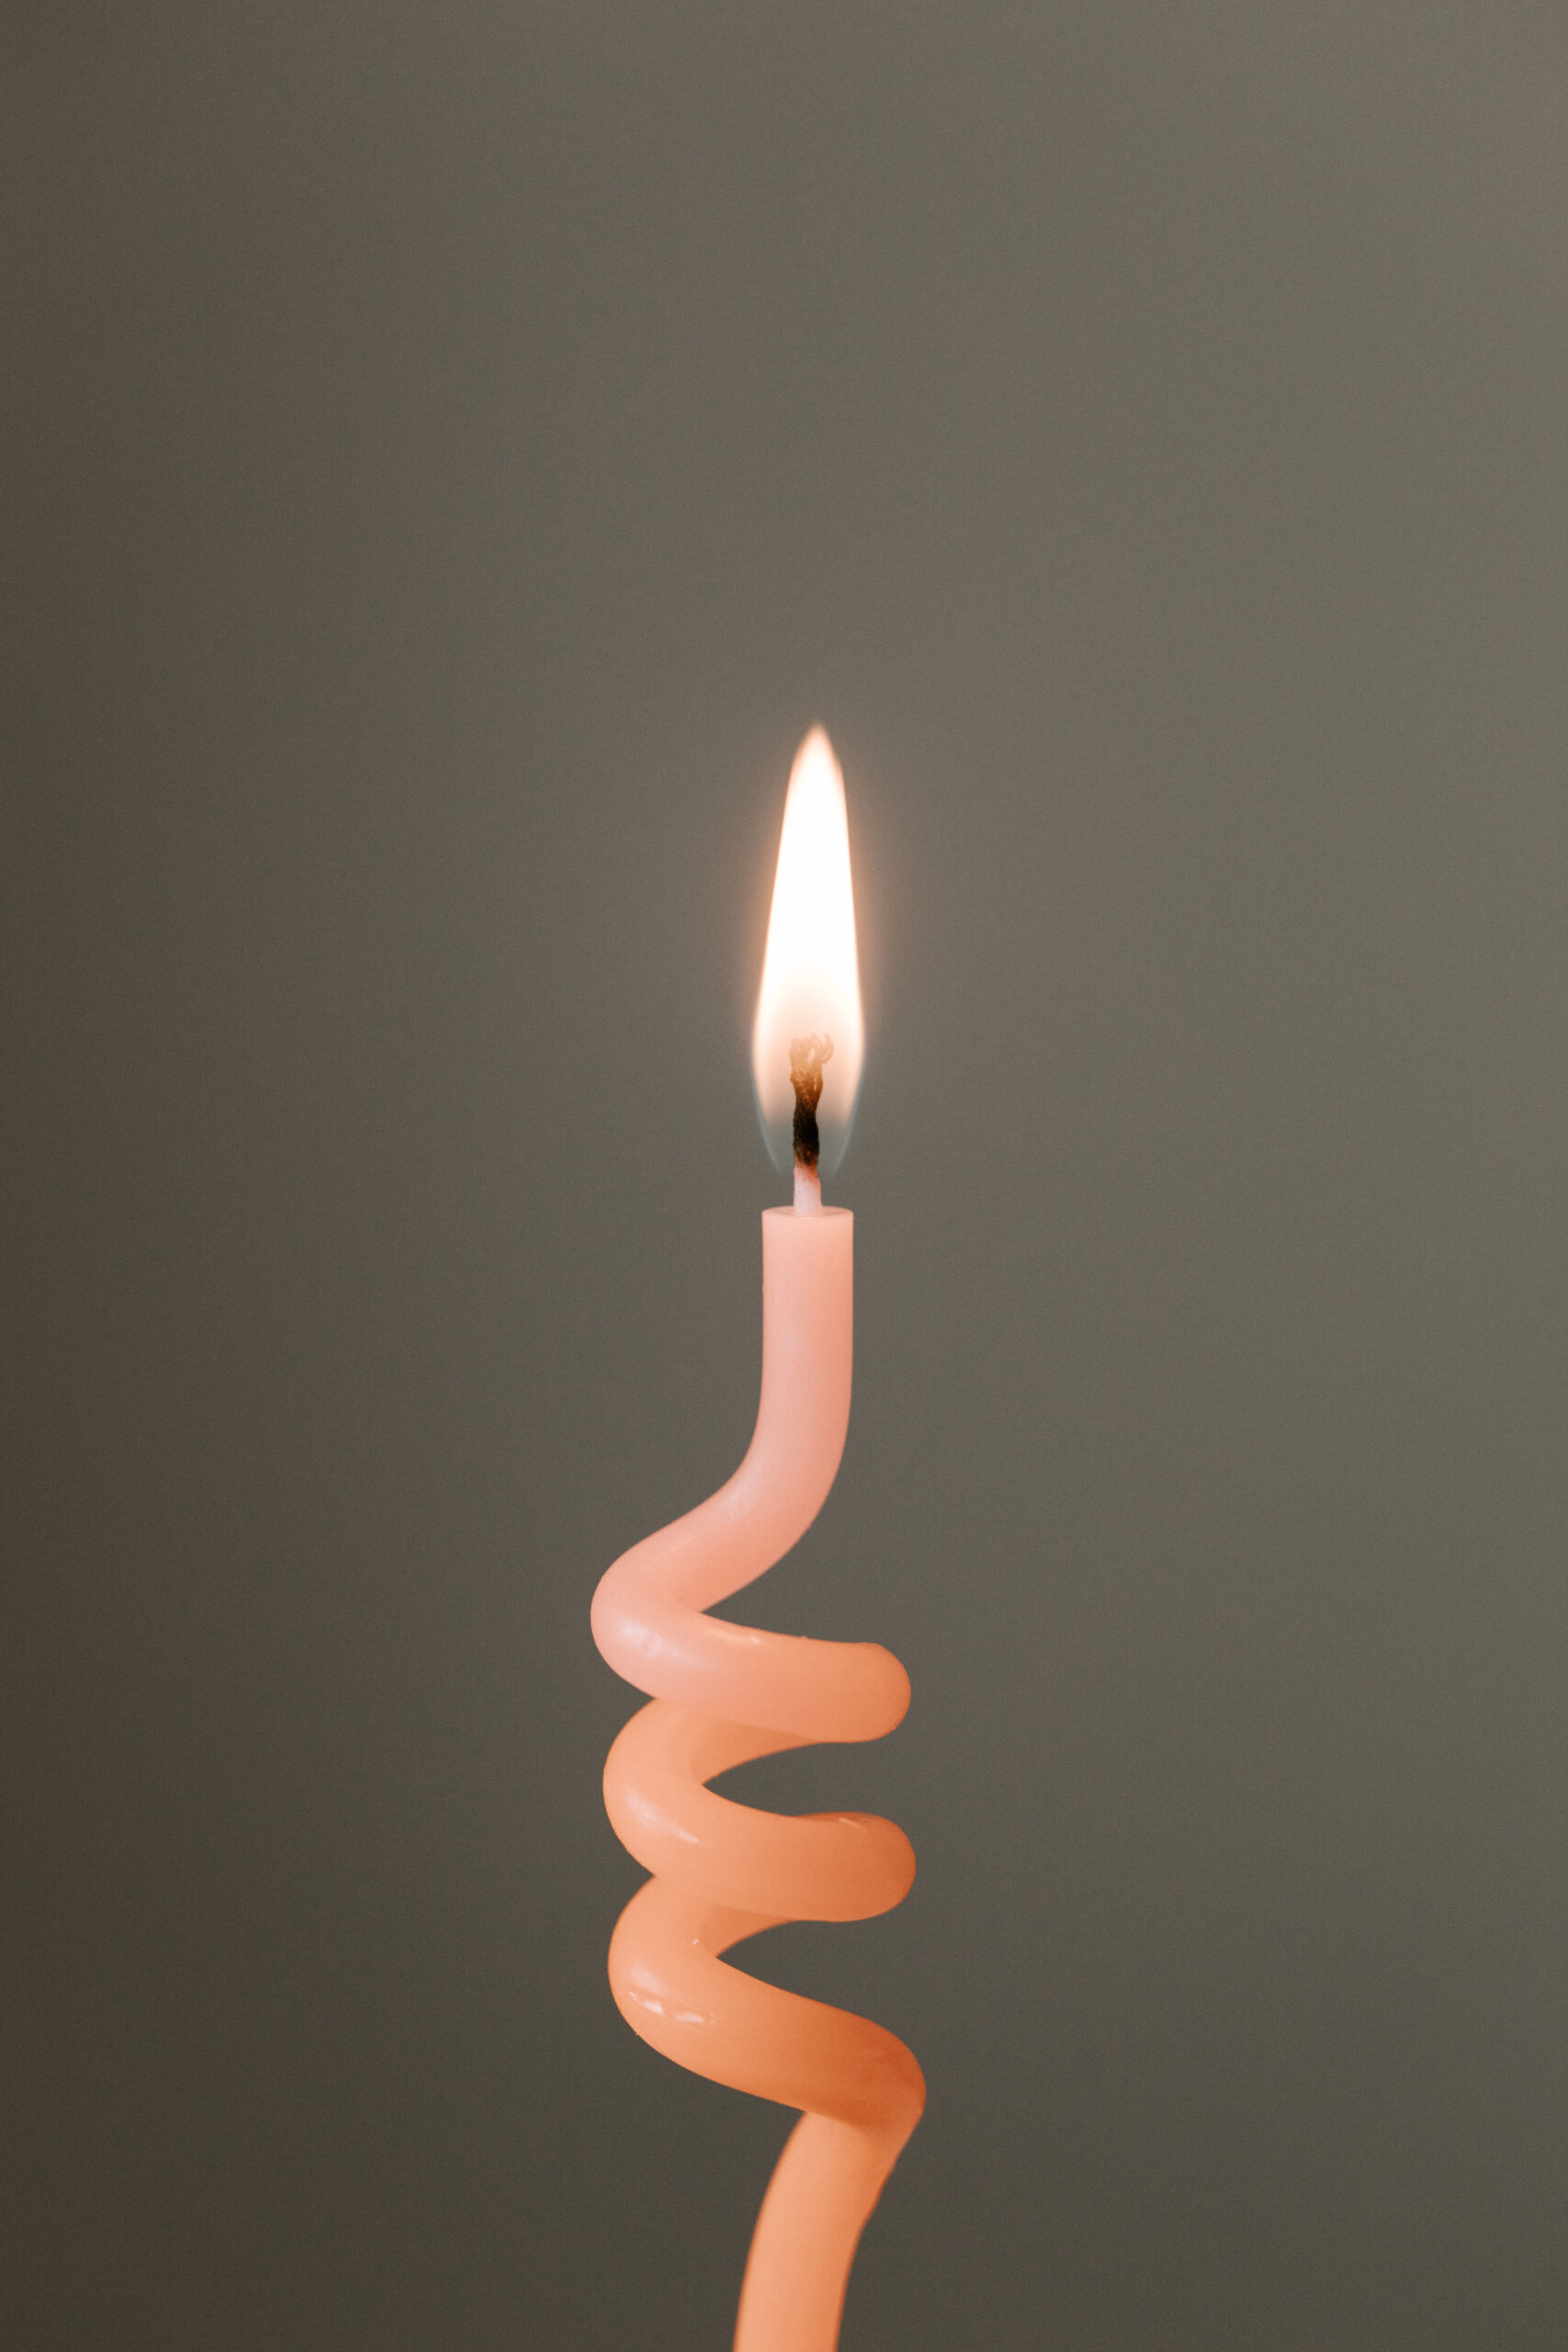 a pink candle or a red candle isn't just for valentine's day - it's for loving yourself too